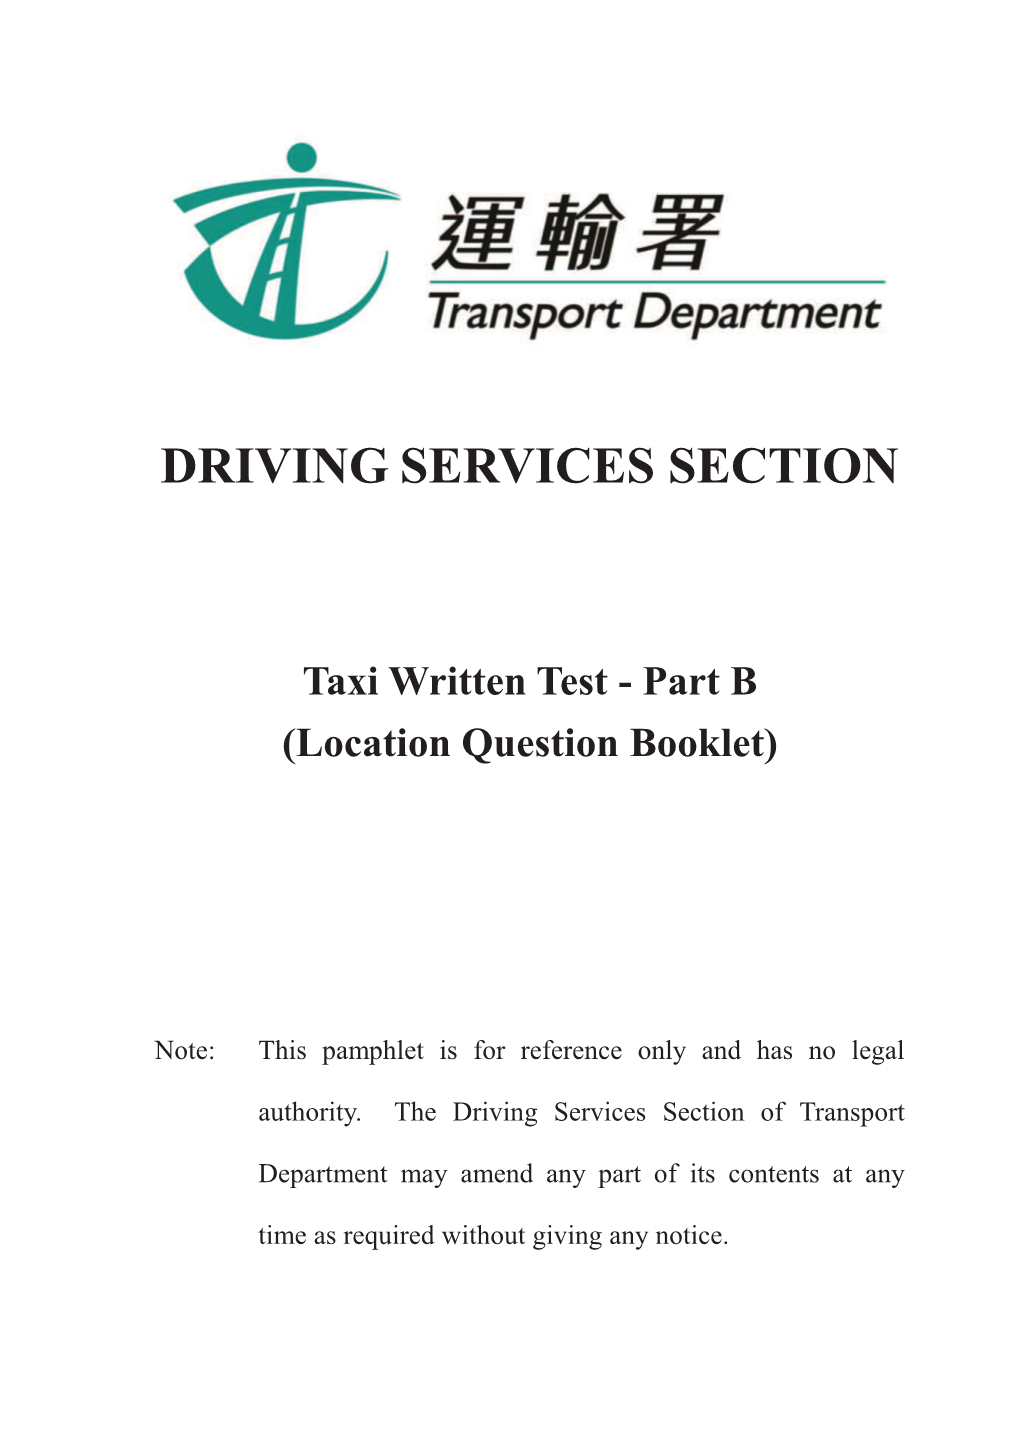 Driving Services Section